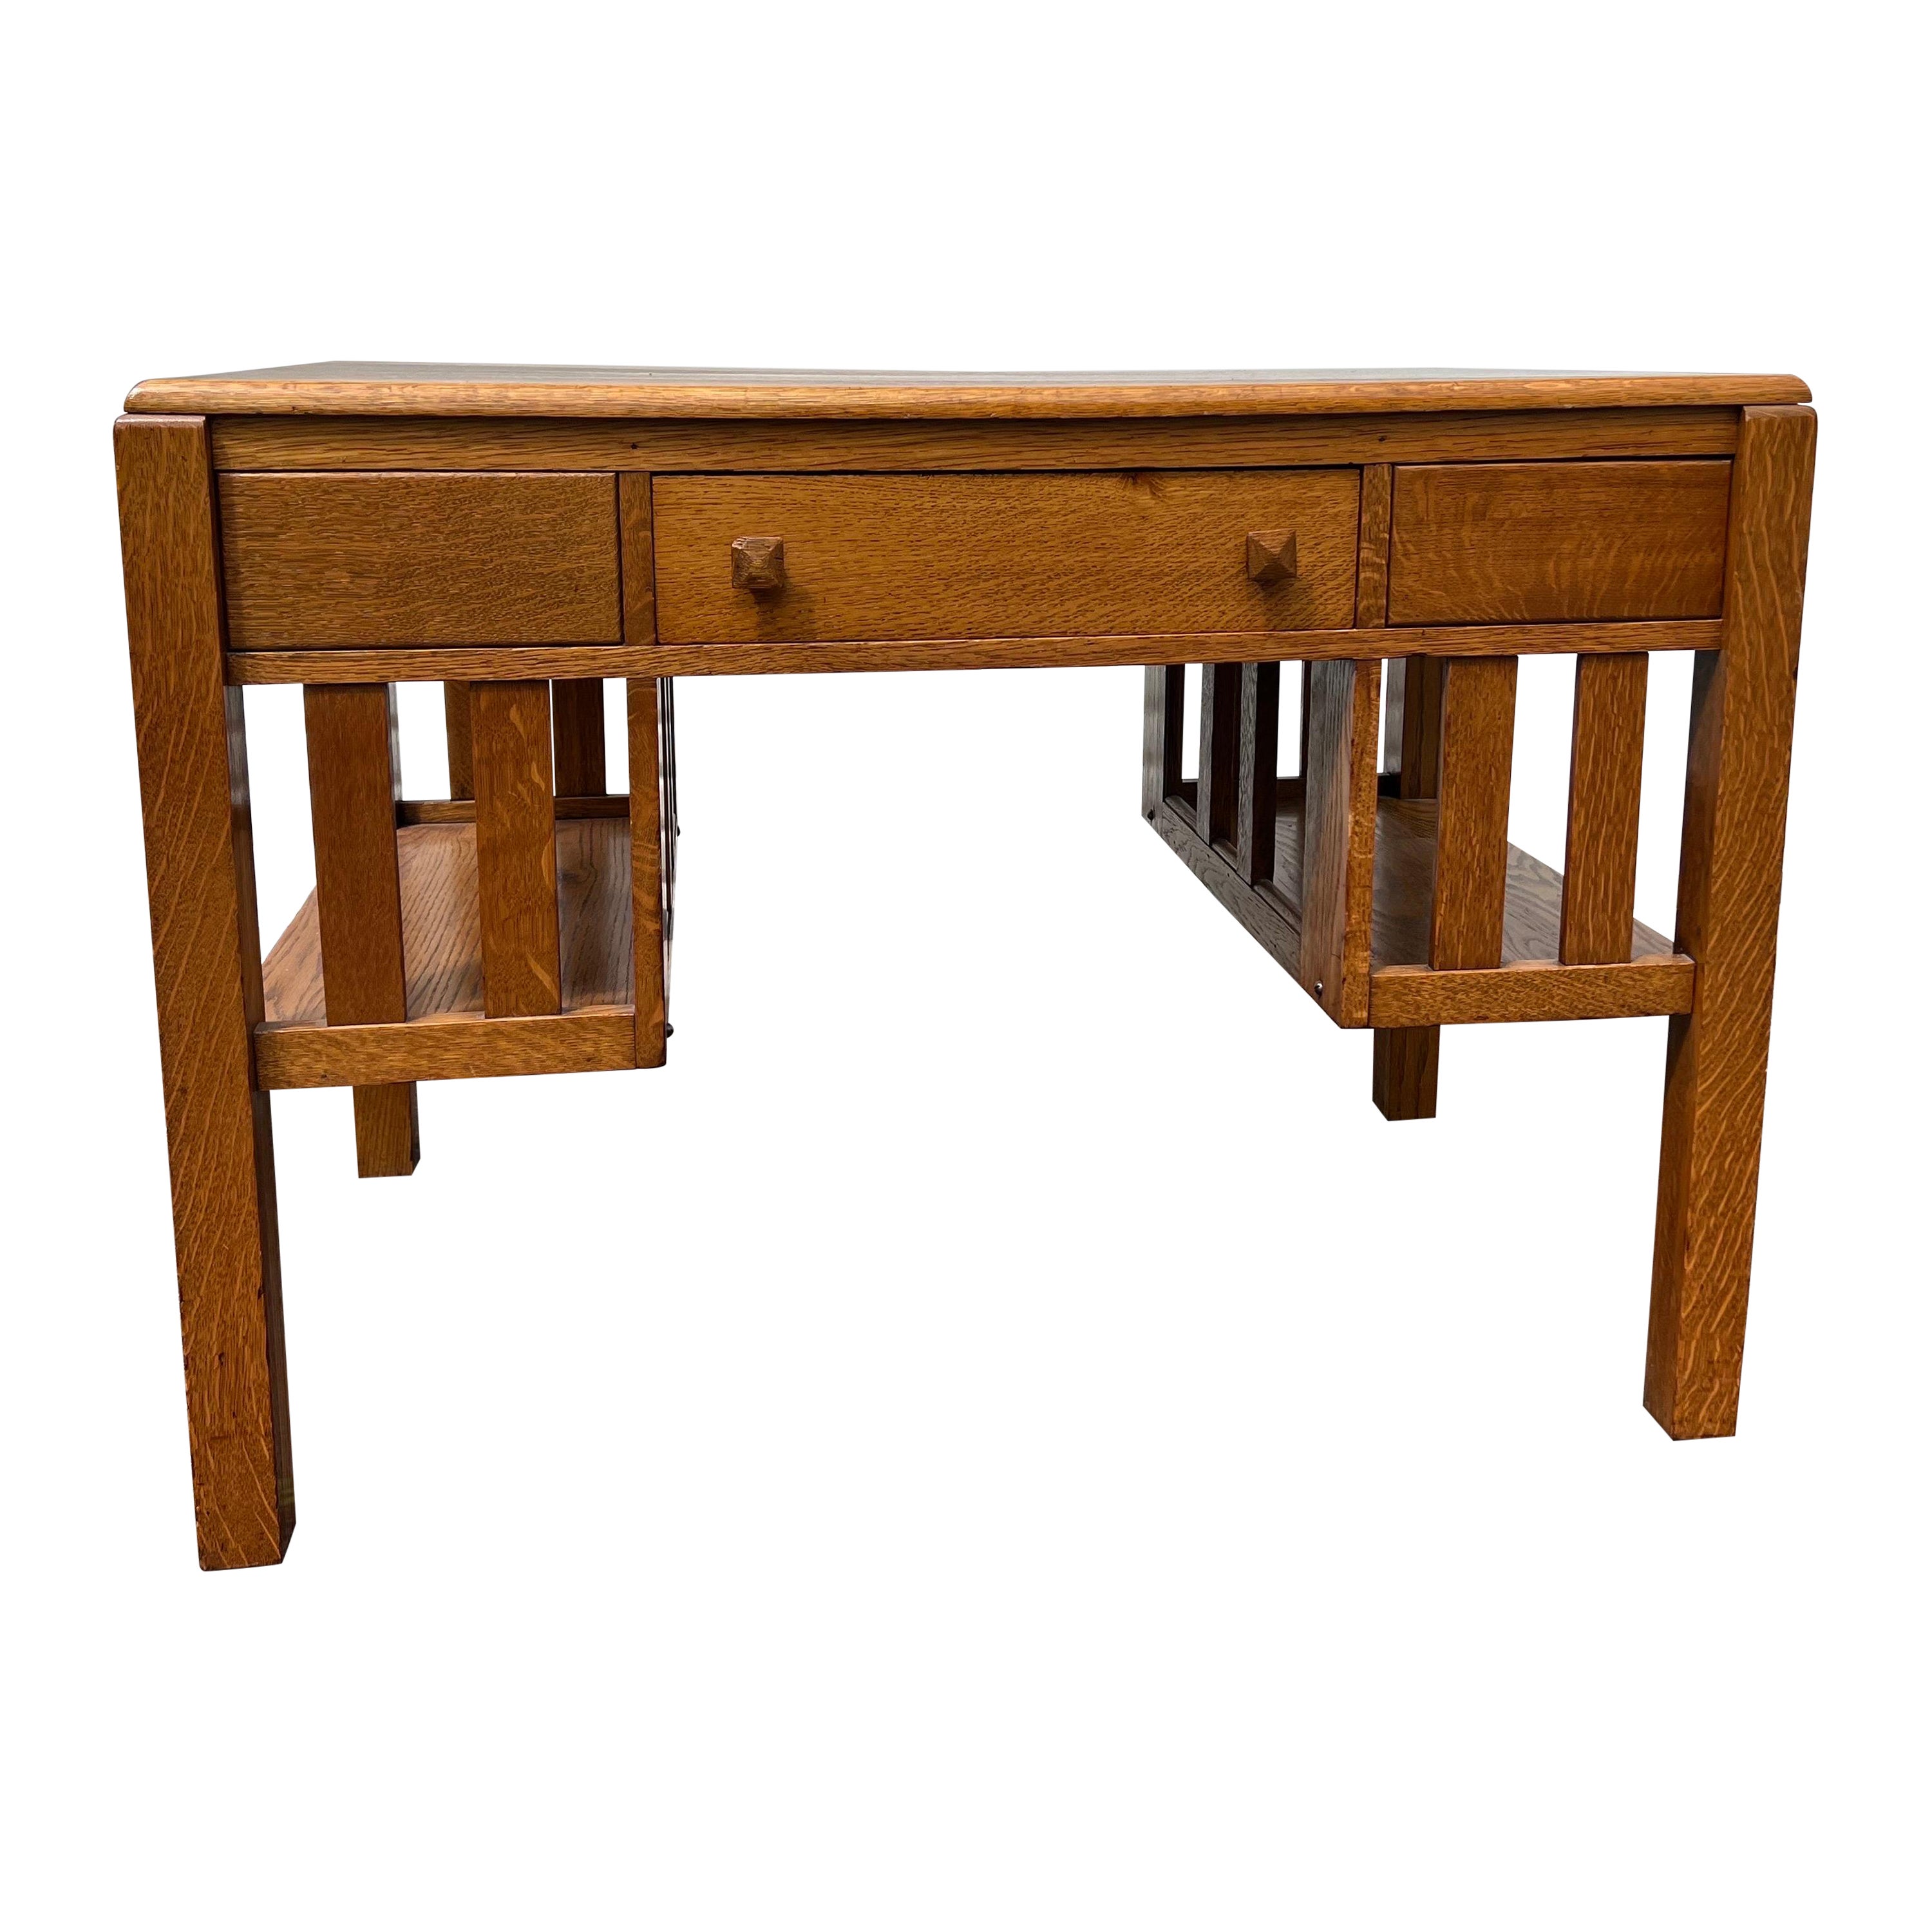 1920s Arts and Crafts Stickley Style Desk